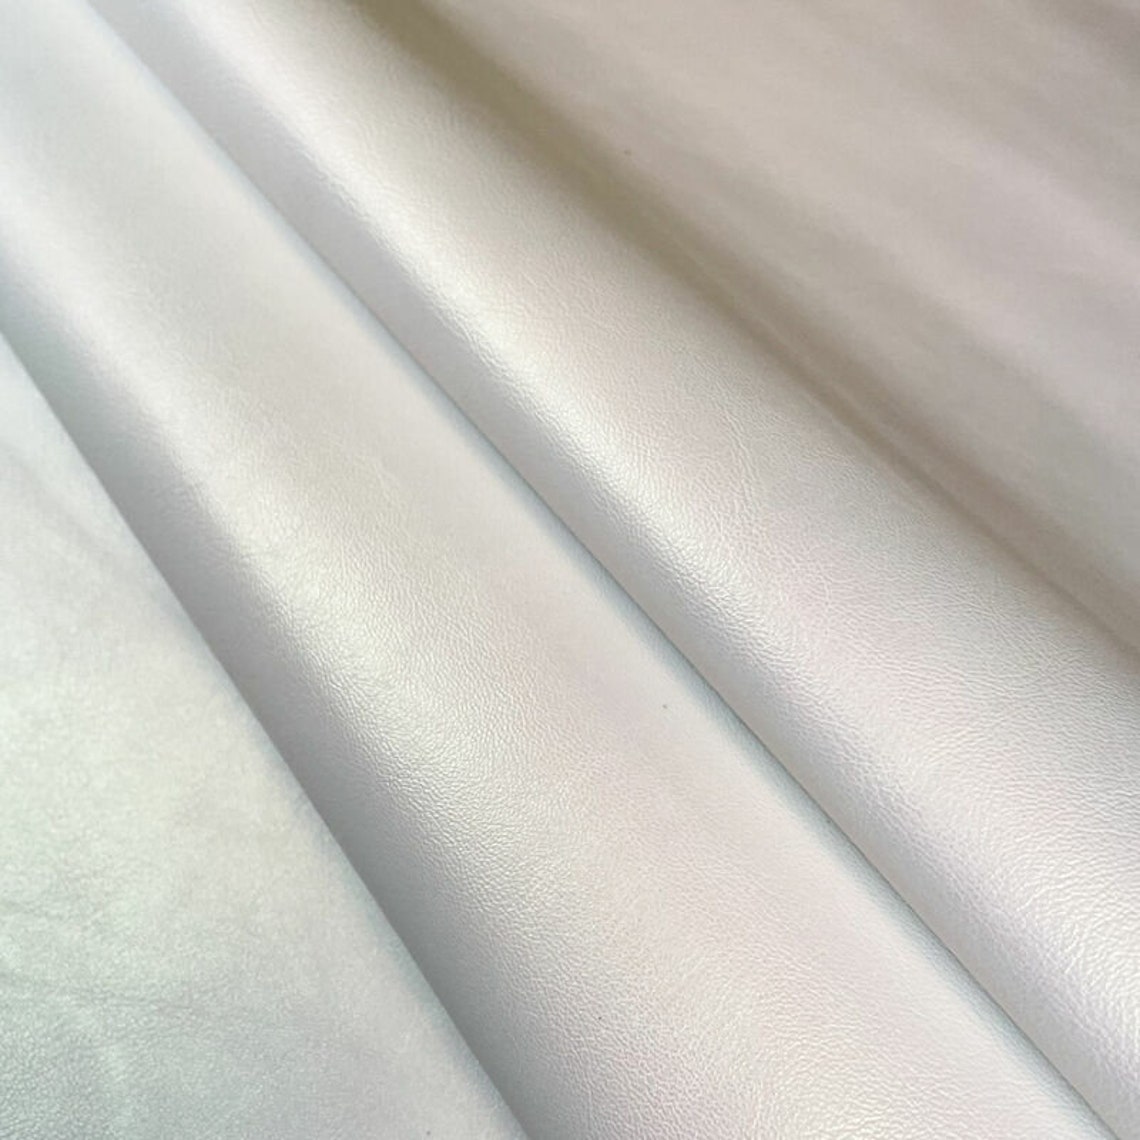 Smooth White Leather Hides // Metallic Lambskin Pieces for | Etsy